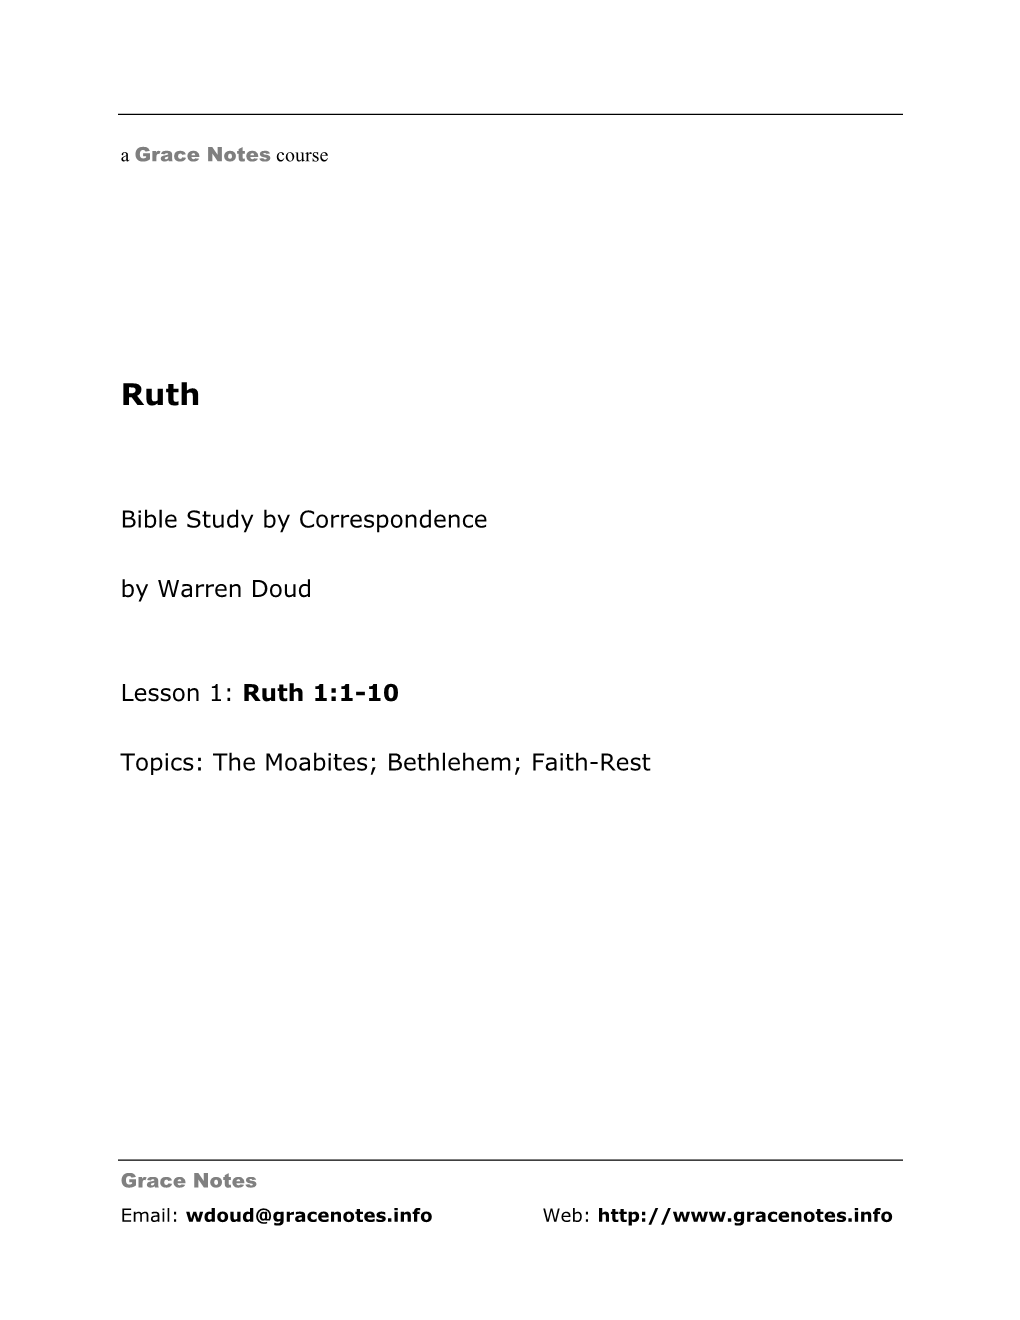 Bible Study by Correspondence by Warren Doud Lesson 1: Ruth 1:1